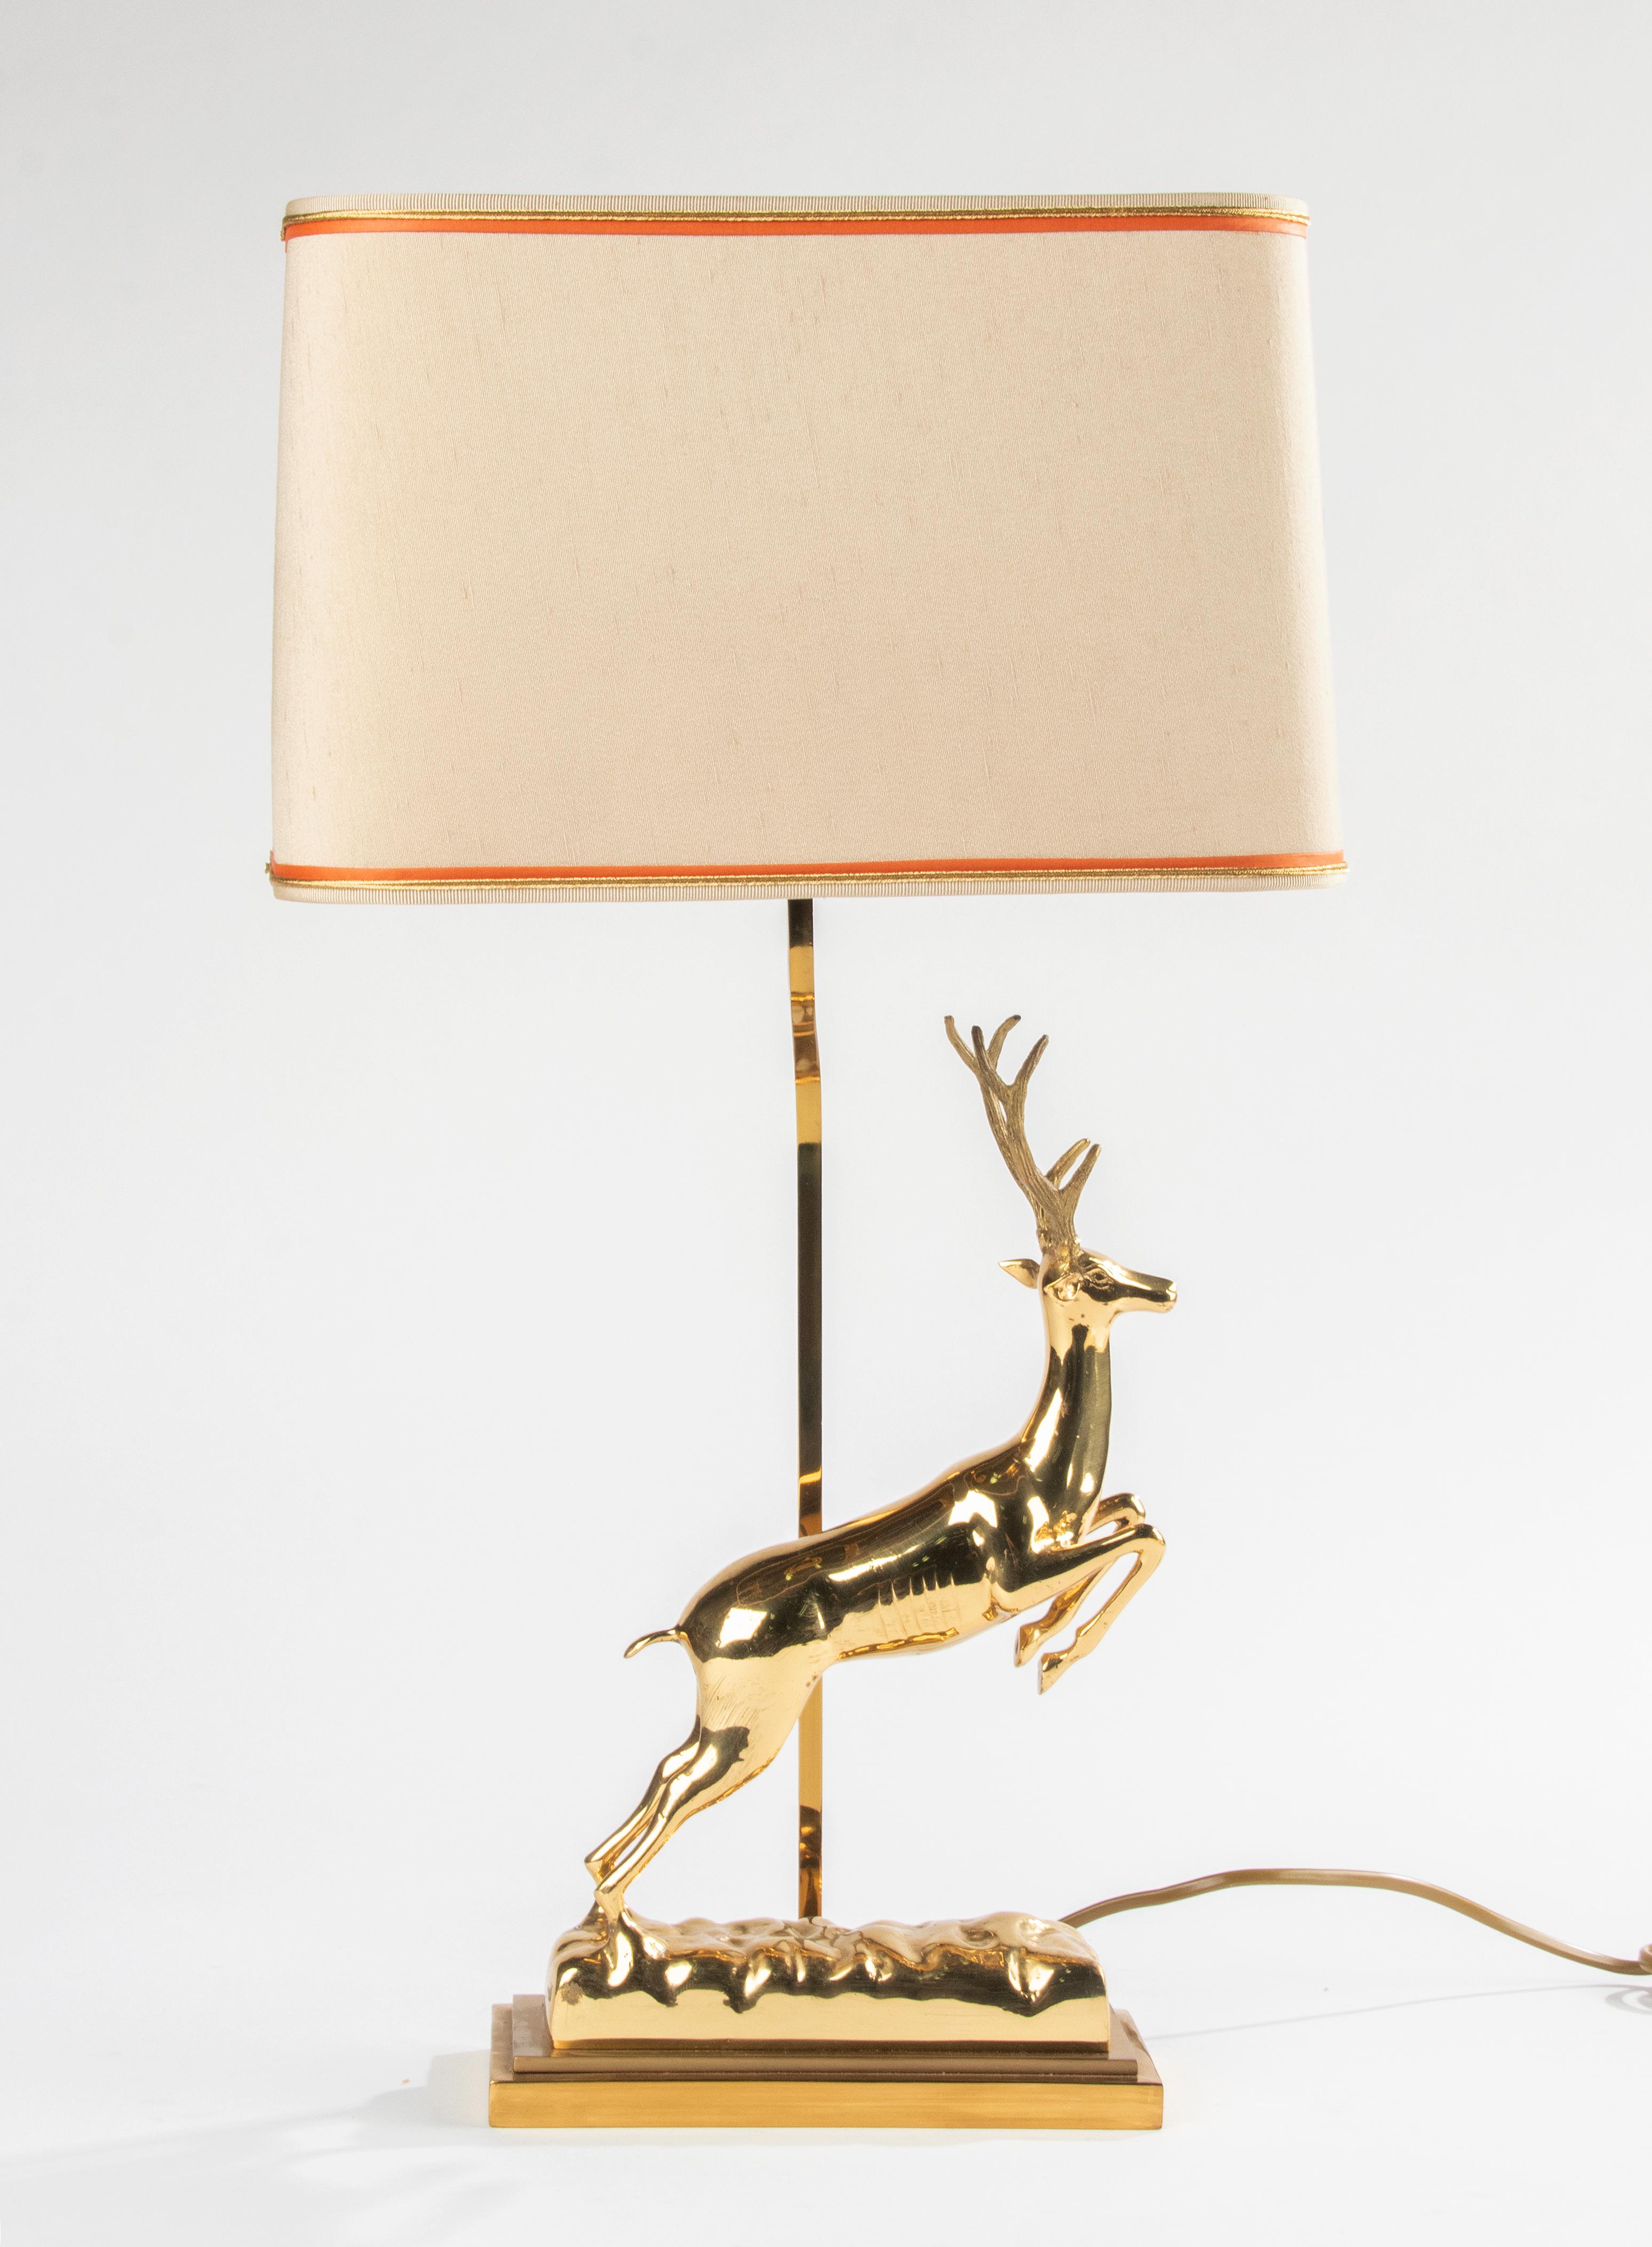 Beautiful Hollywood Regency table lamp, with a stylized sculpture of a deer. 
The lamp dates from circa 1960-1970. On the bottom there is a label 'J.L.B.', this is probably a Belgian maker, but there is not much information about this manufacturer